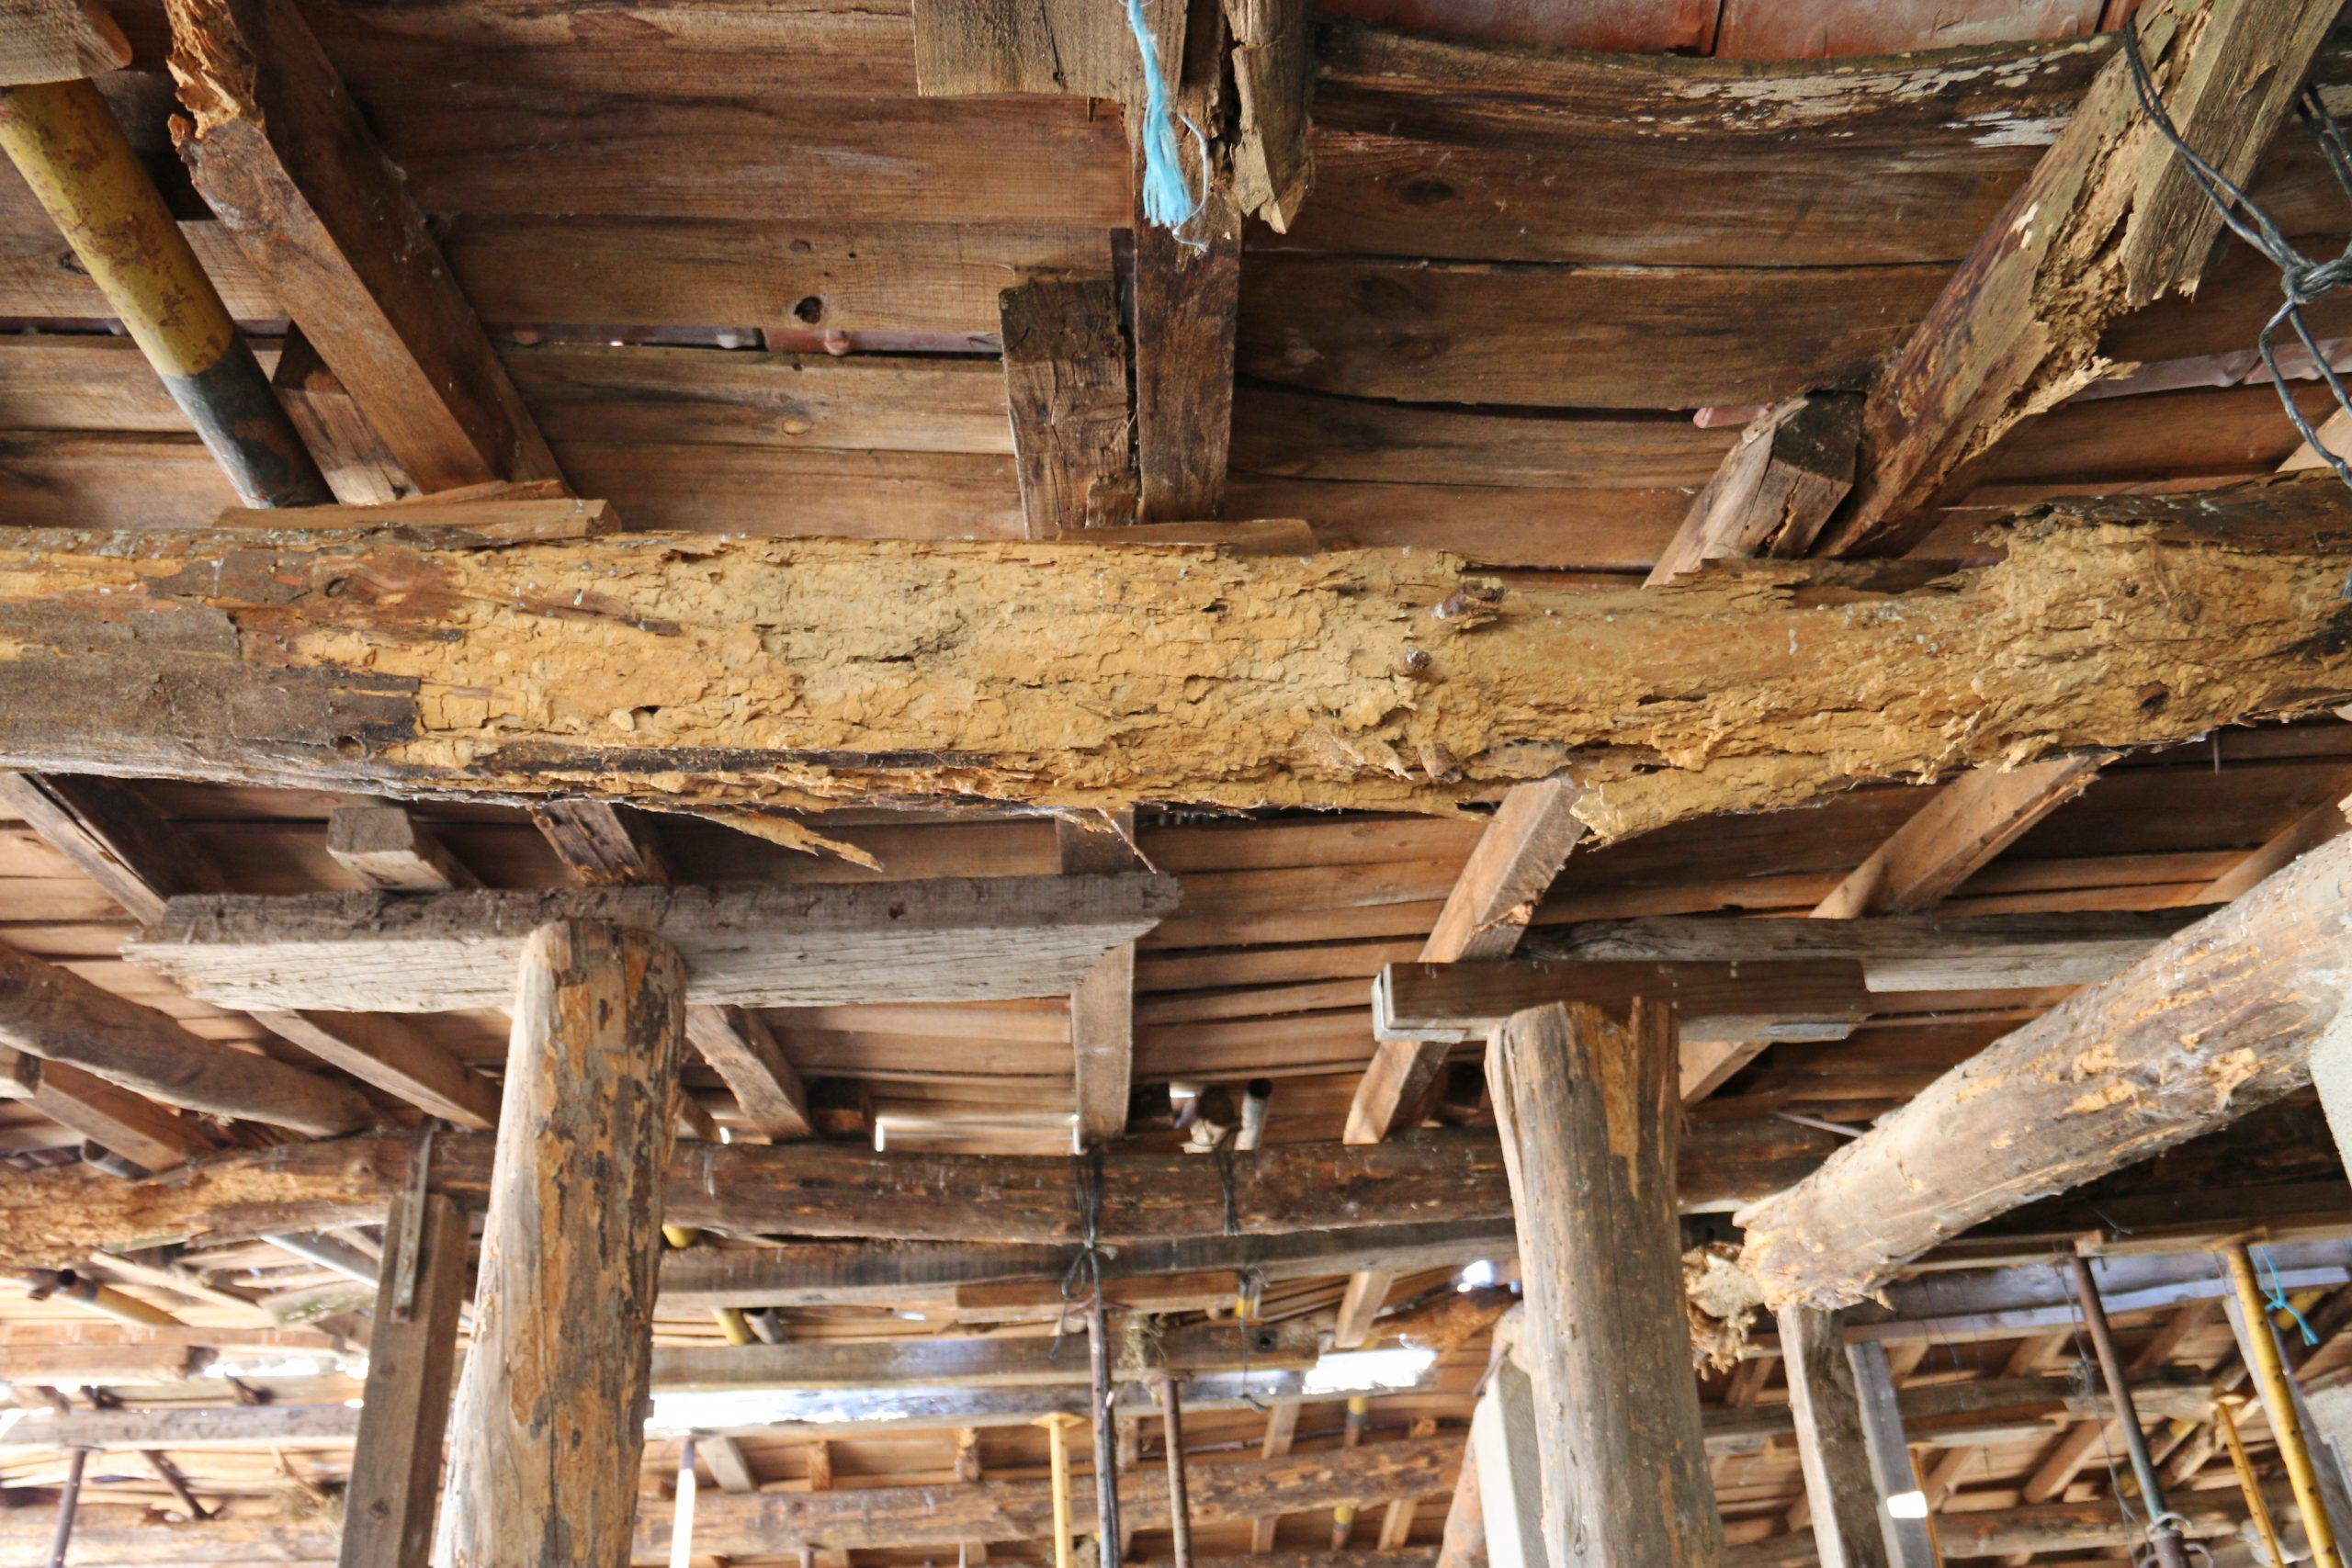 Wood Roof Girders With Woodworm